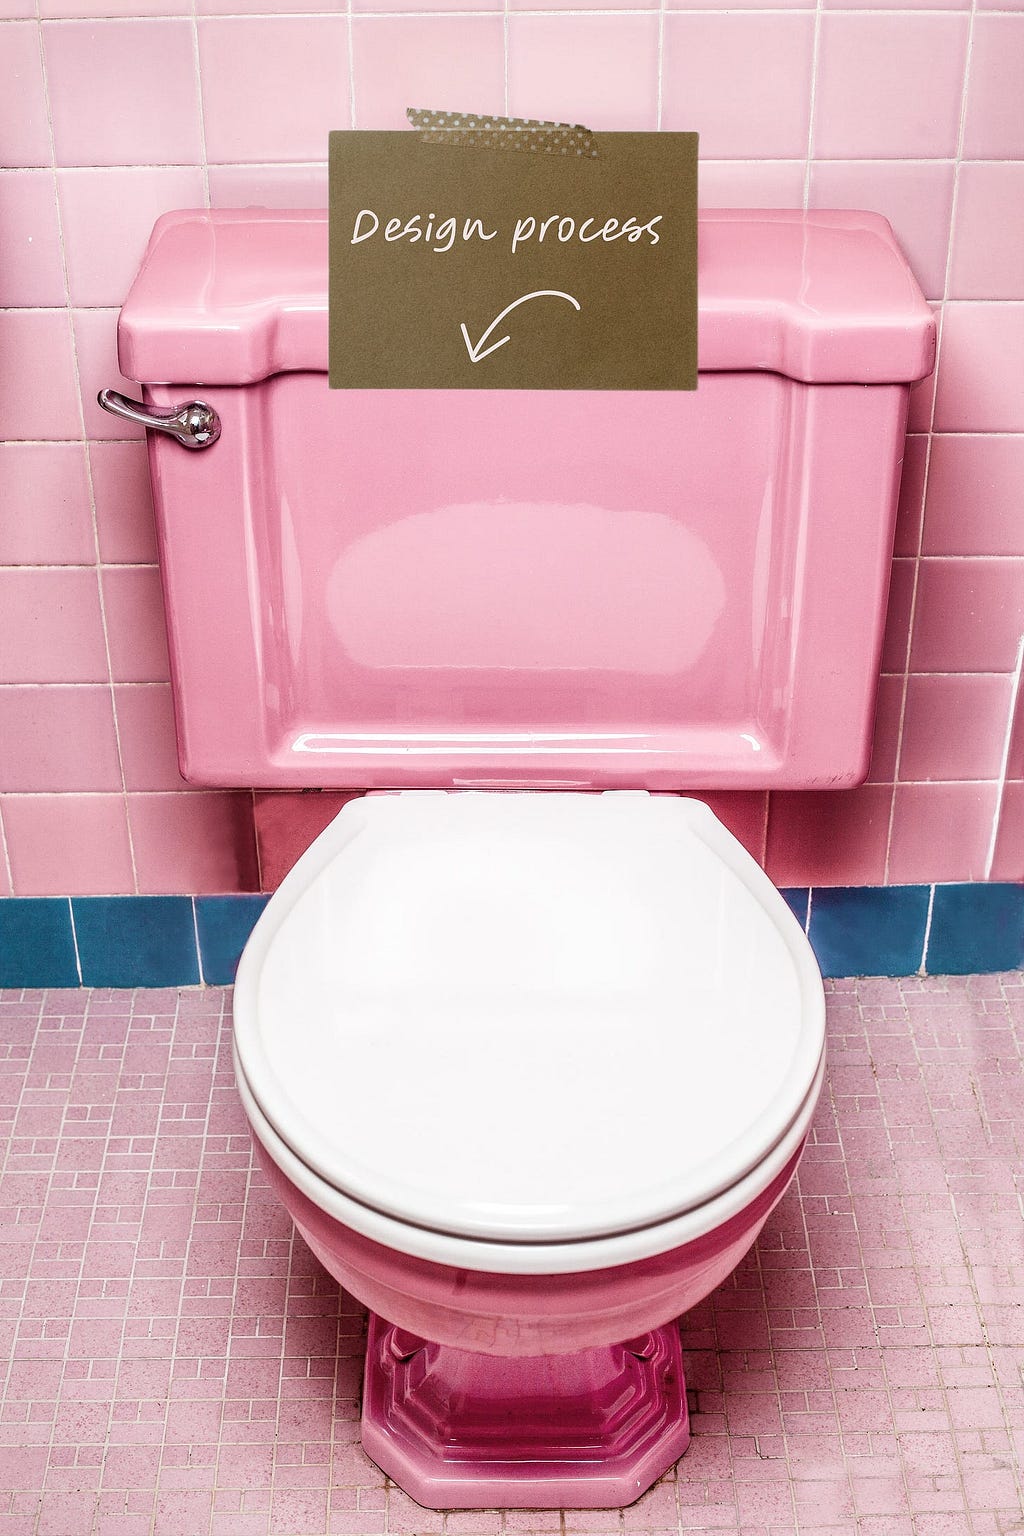 Image of a toilet with a sign to flush the design process